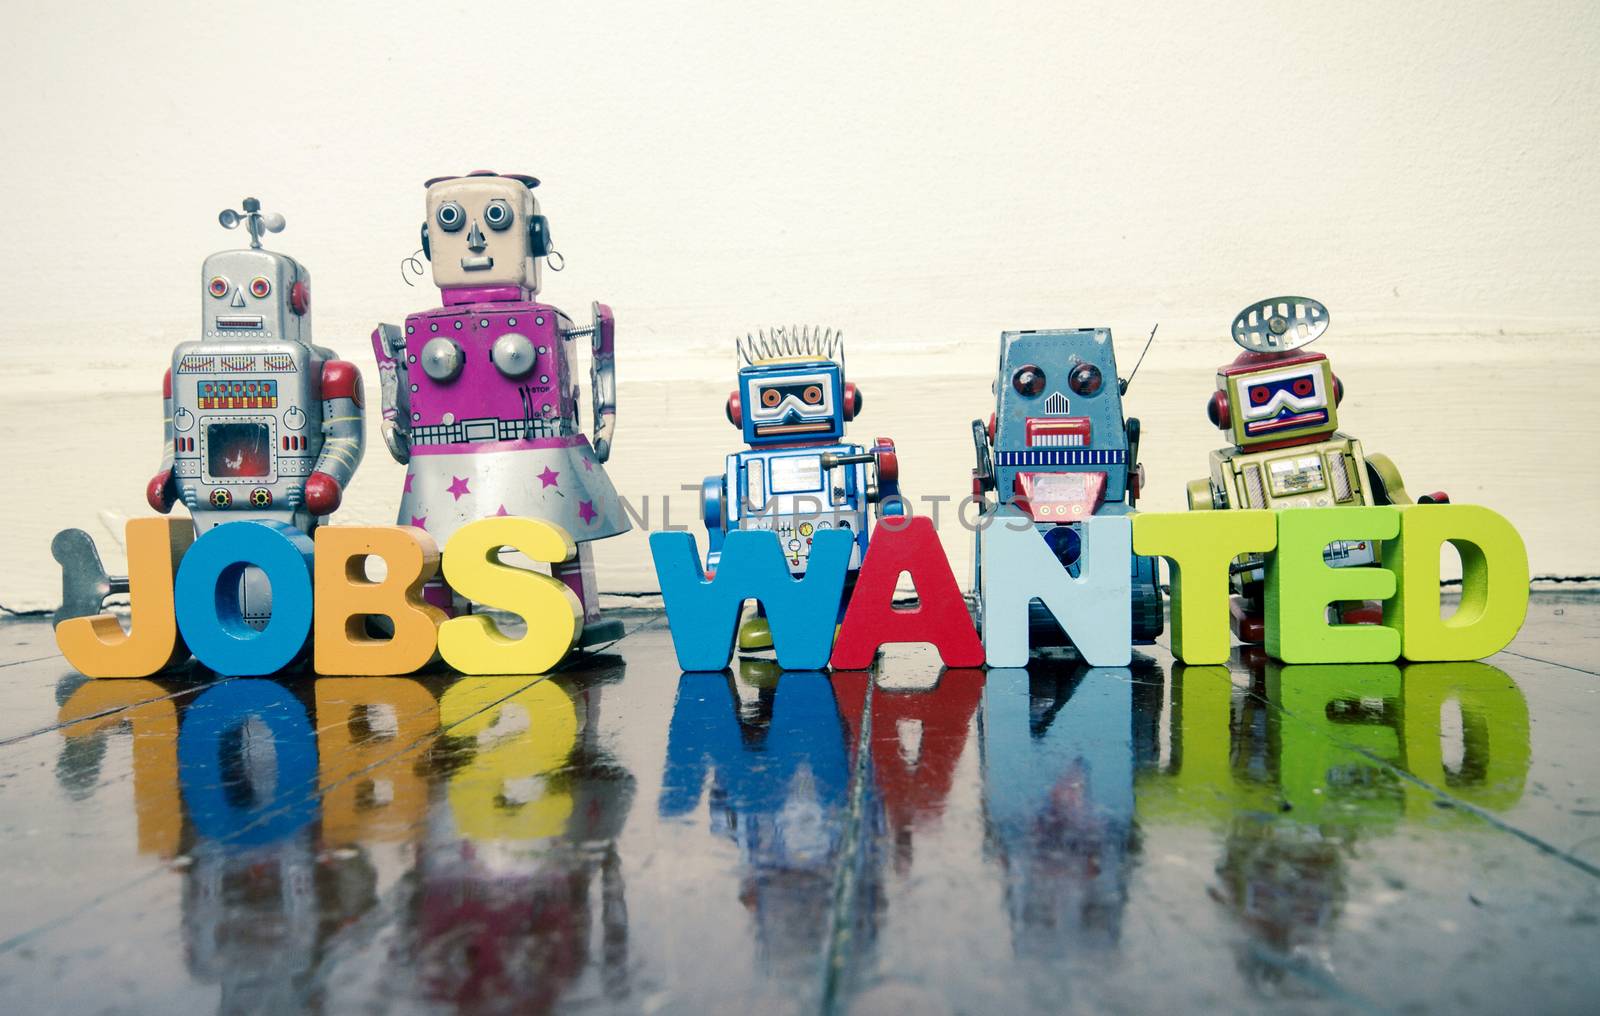 the words JOBS WANTED with wooden letters and robot toys on a wo by davincidig